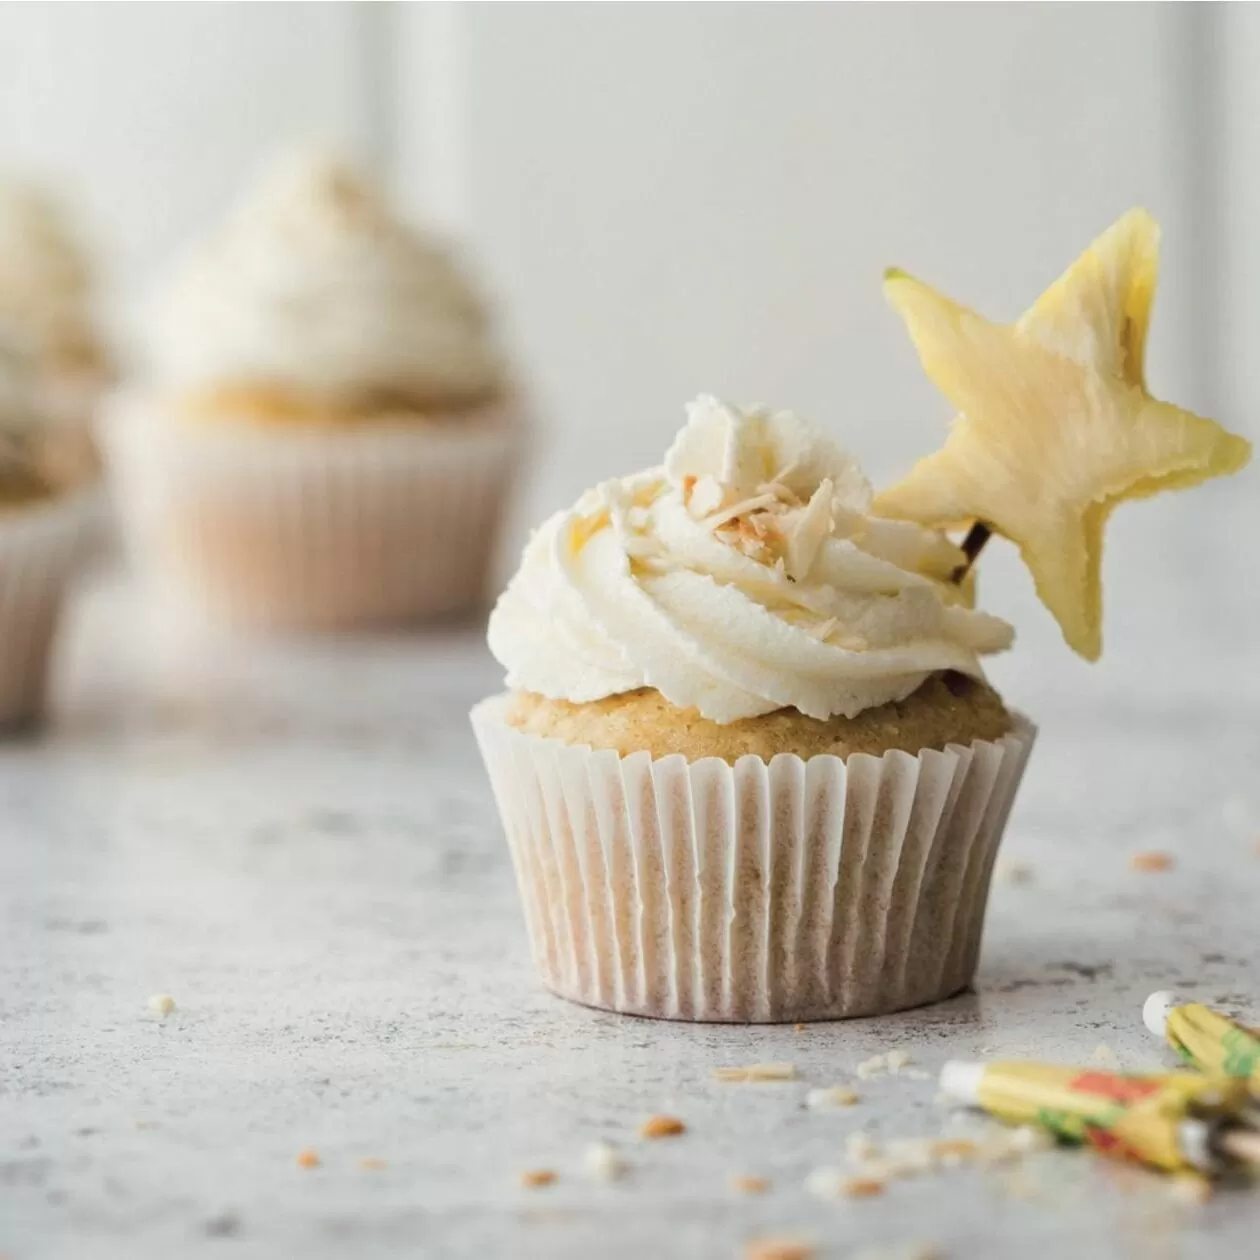 Pineapple and coconut cupcakes